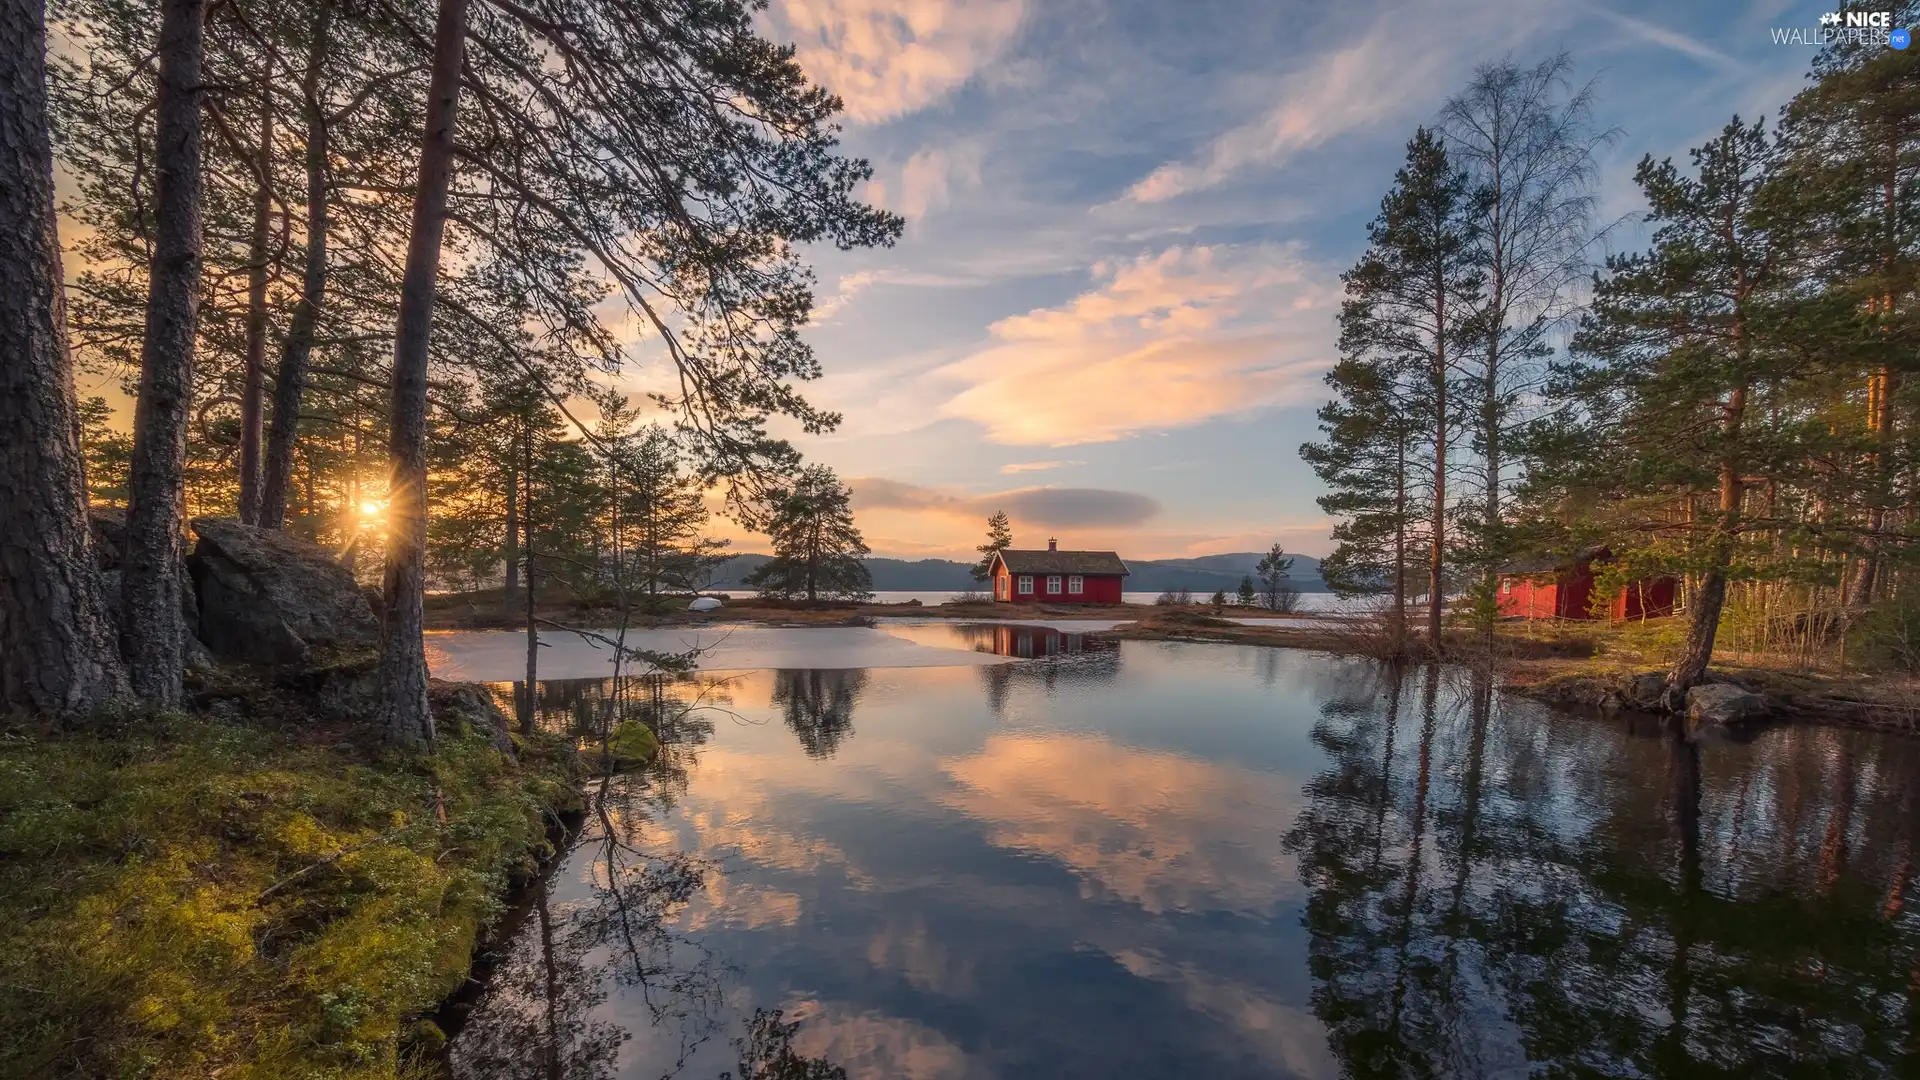 Vaeleren Lake, rays of the Sun, house, trees, Ringerike, Norway, clouds, reflection, viewes